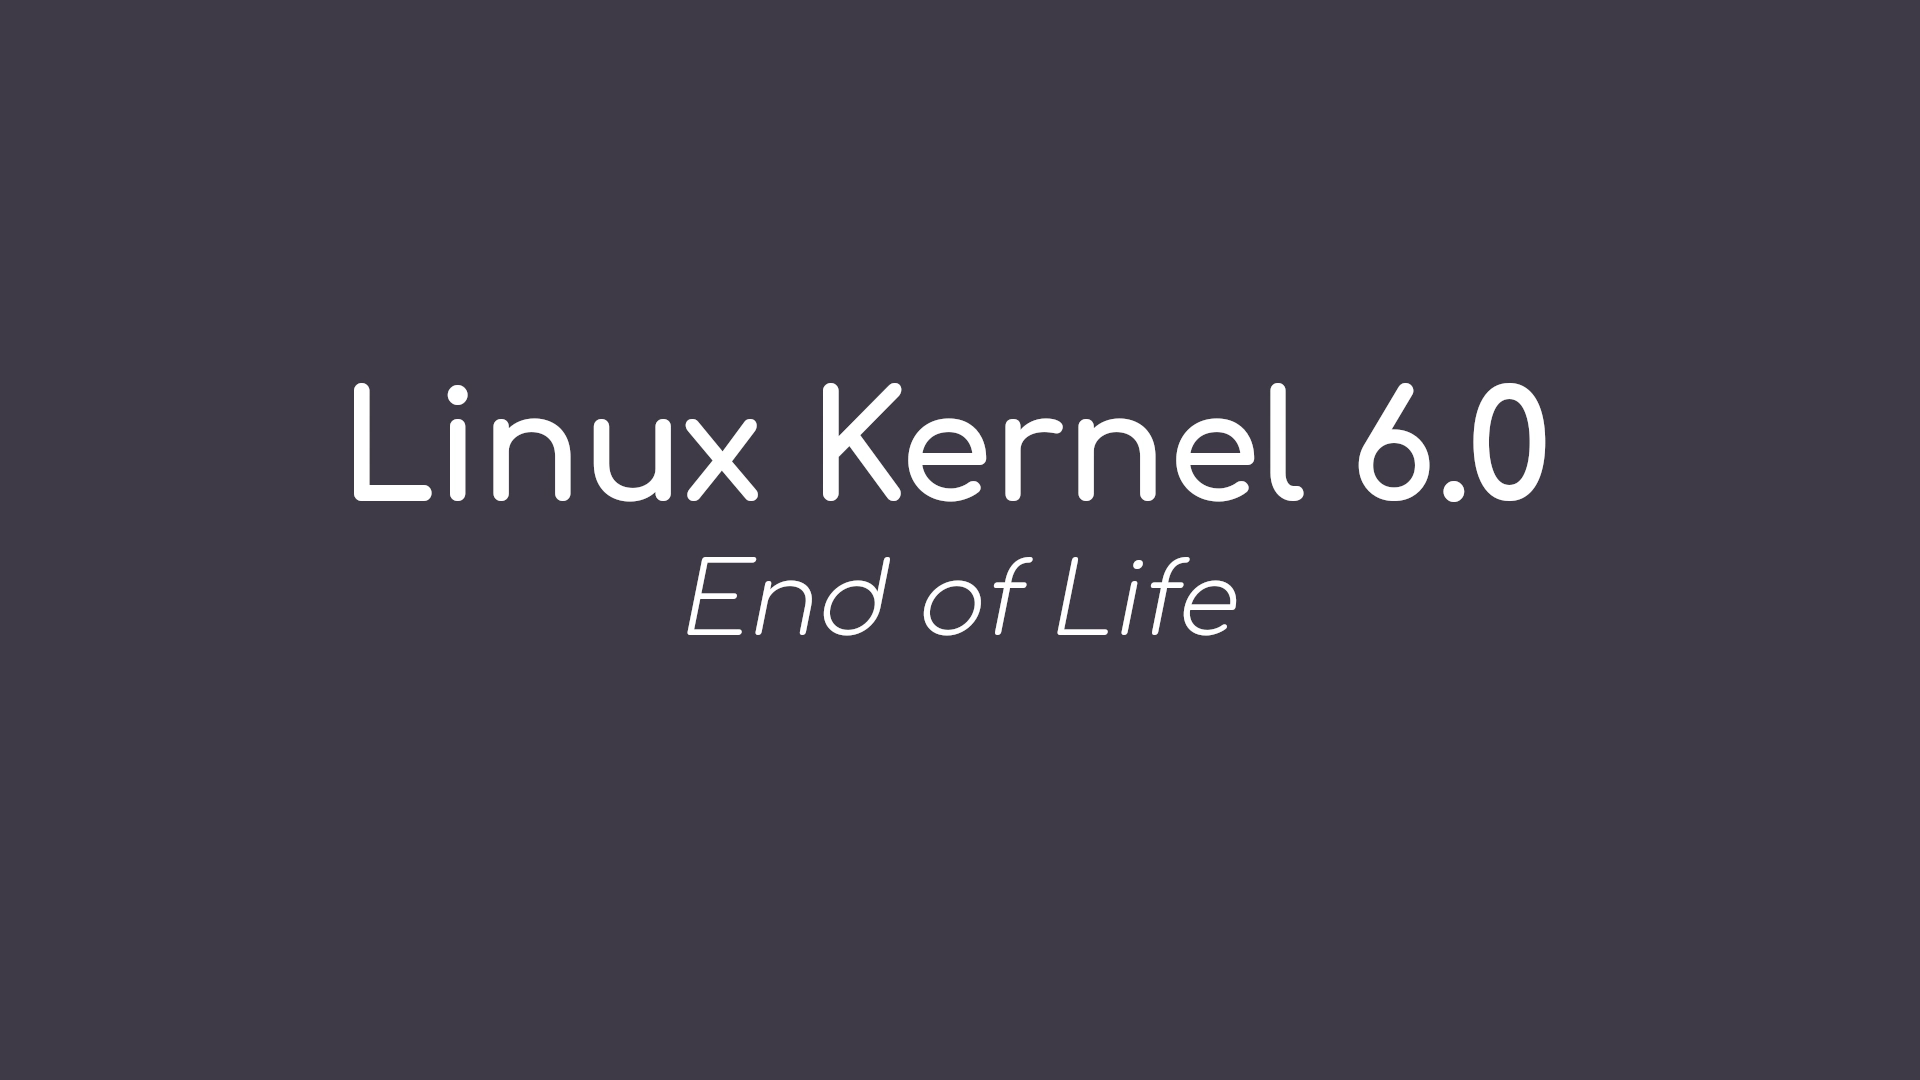 Linux Kernel 6.0 Reaches End of Life, Users Urged to Upgrade to Linux 6.1